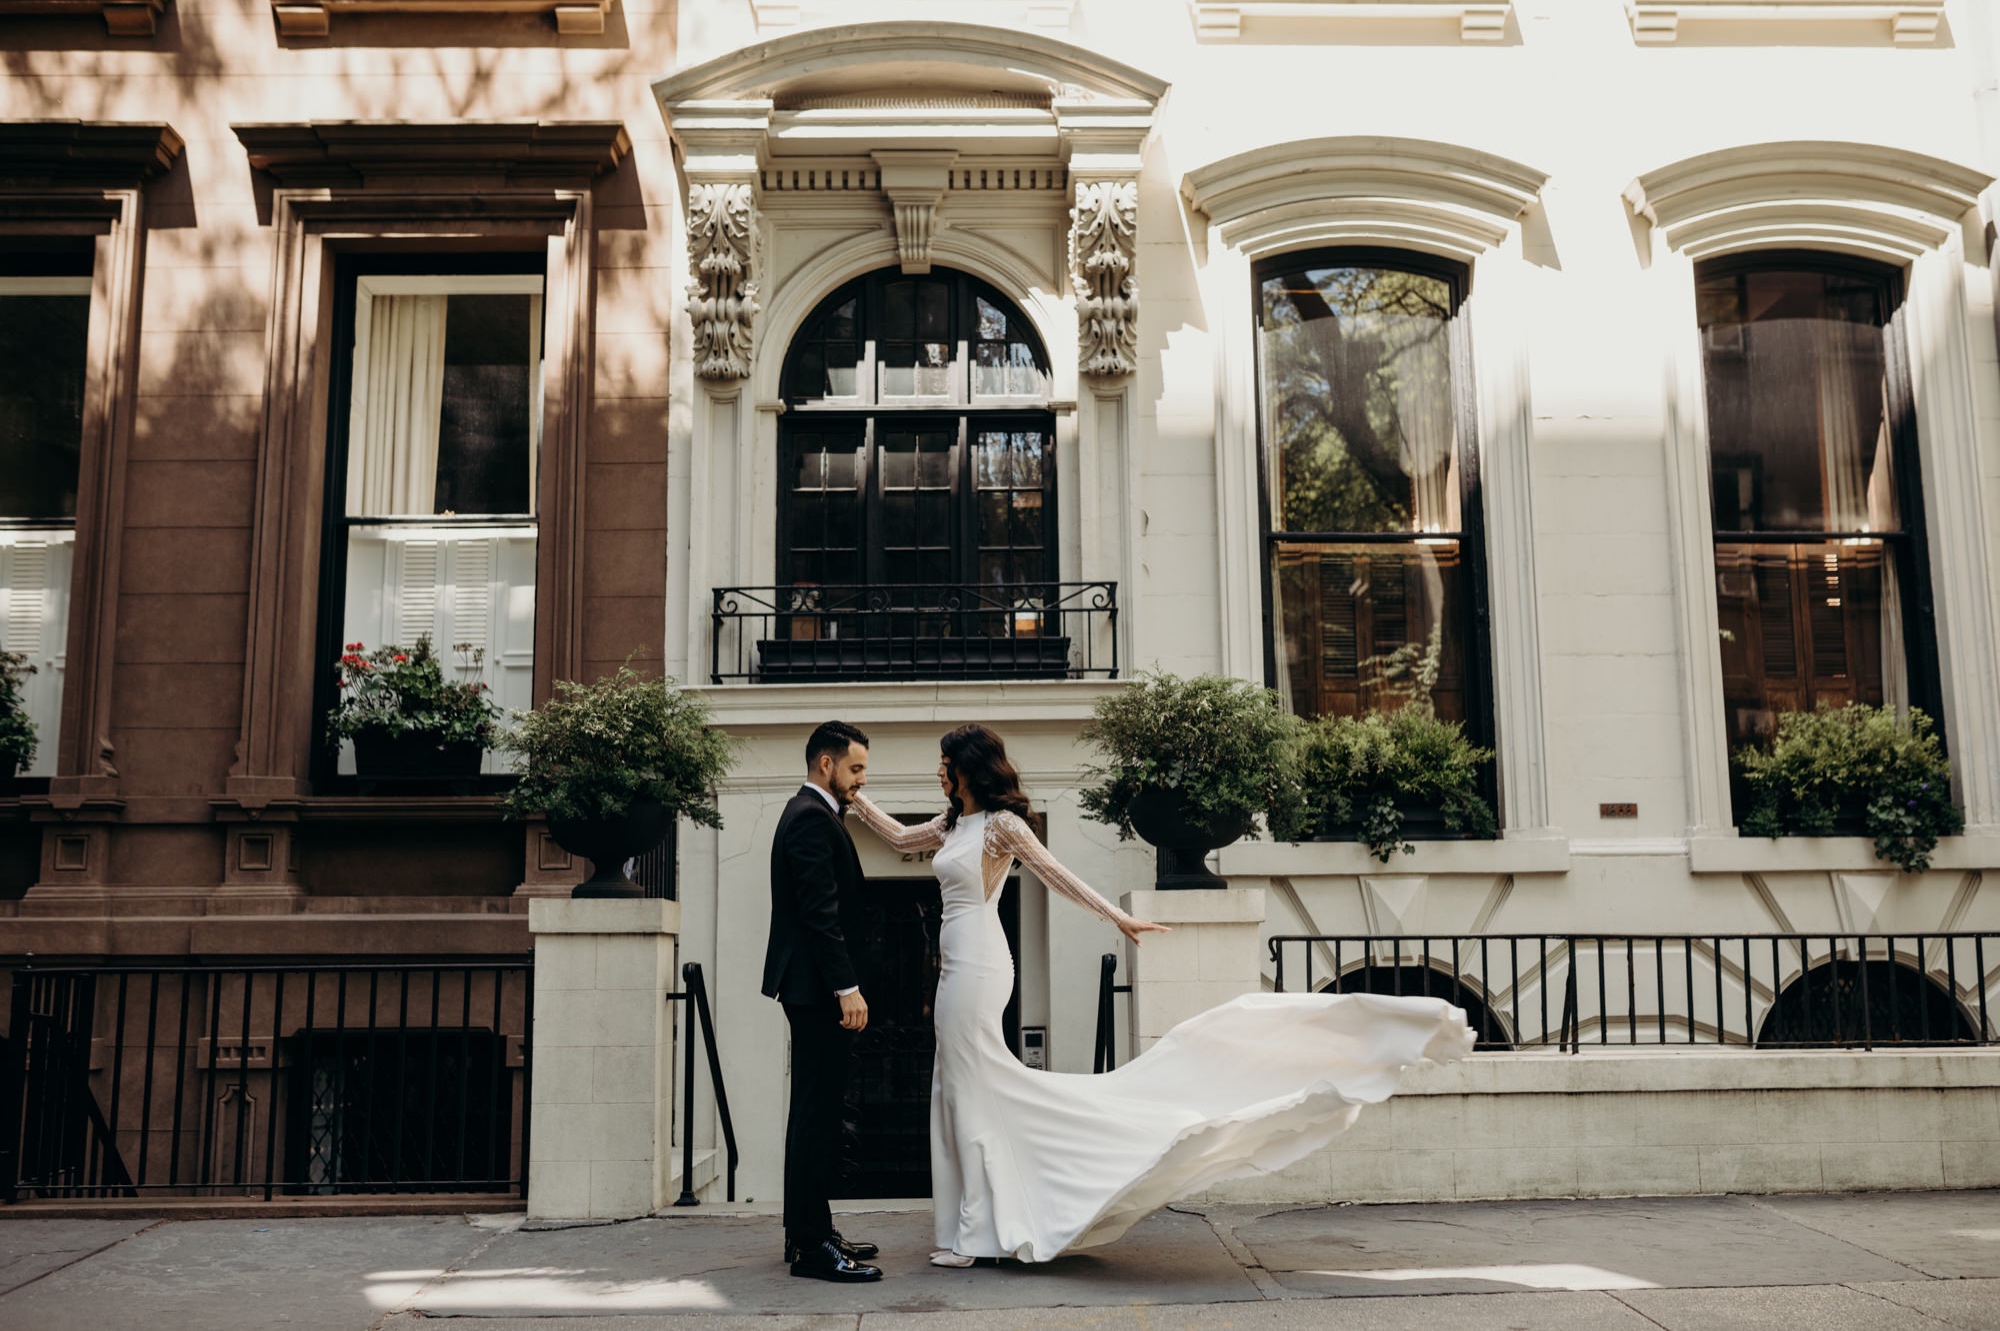 photograph of a bride and groom with wedding dress flowing in the wind in brooklyn, new york city